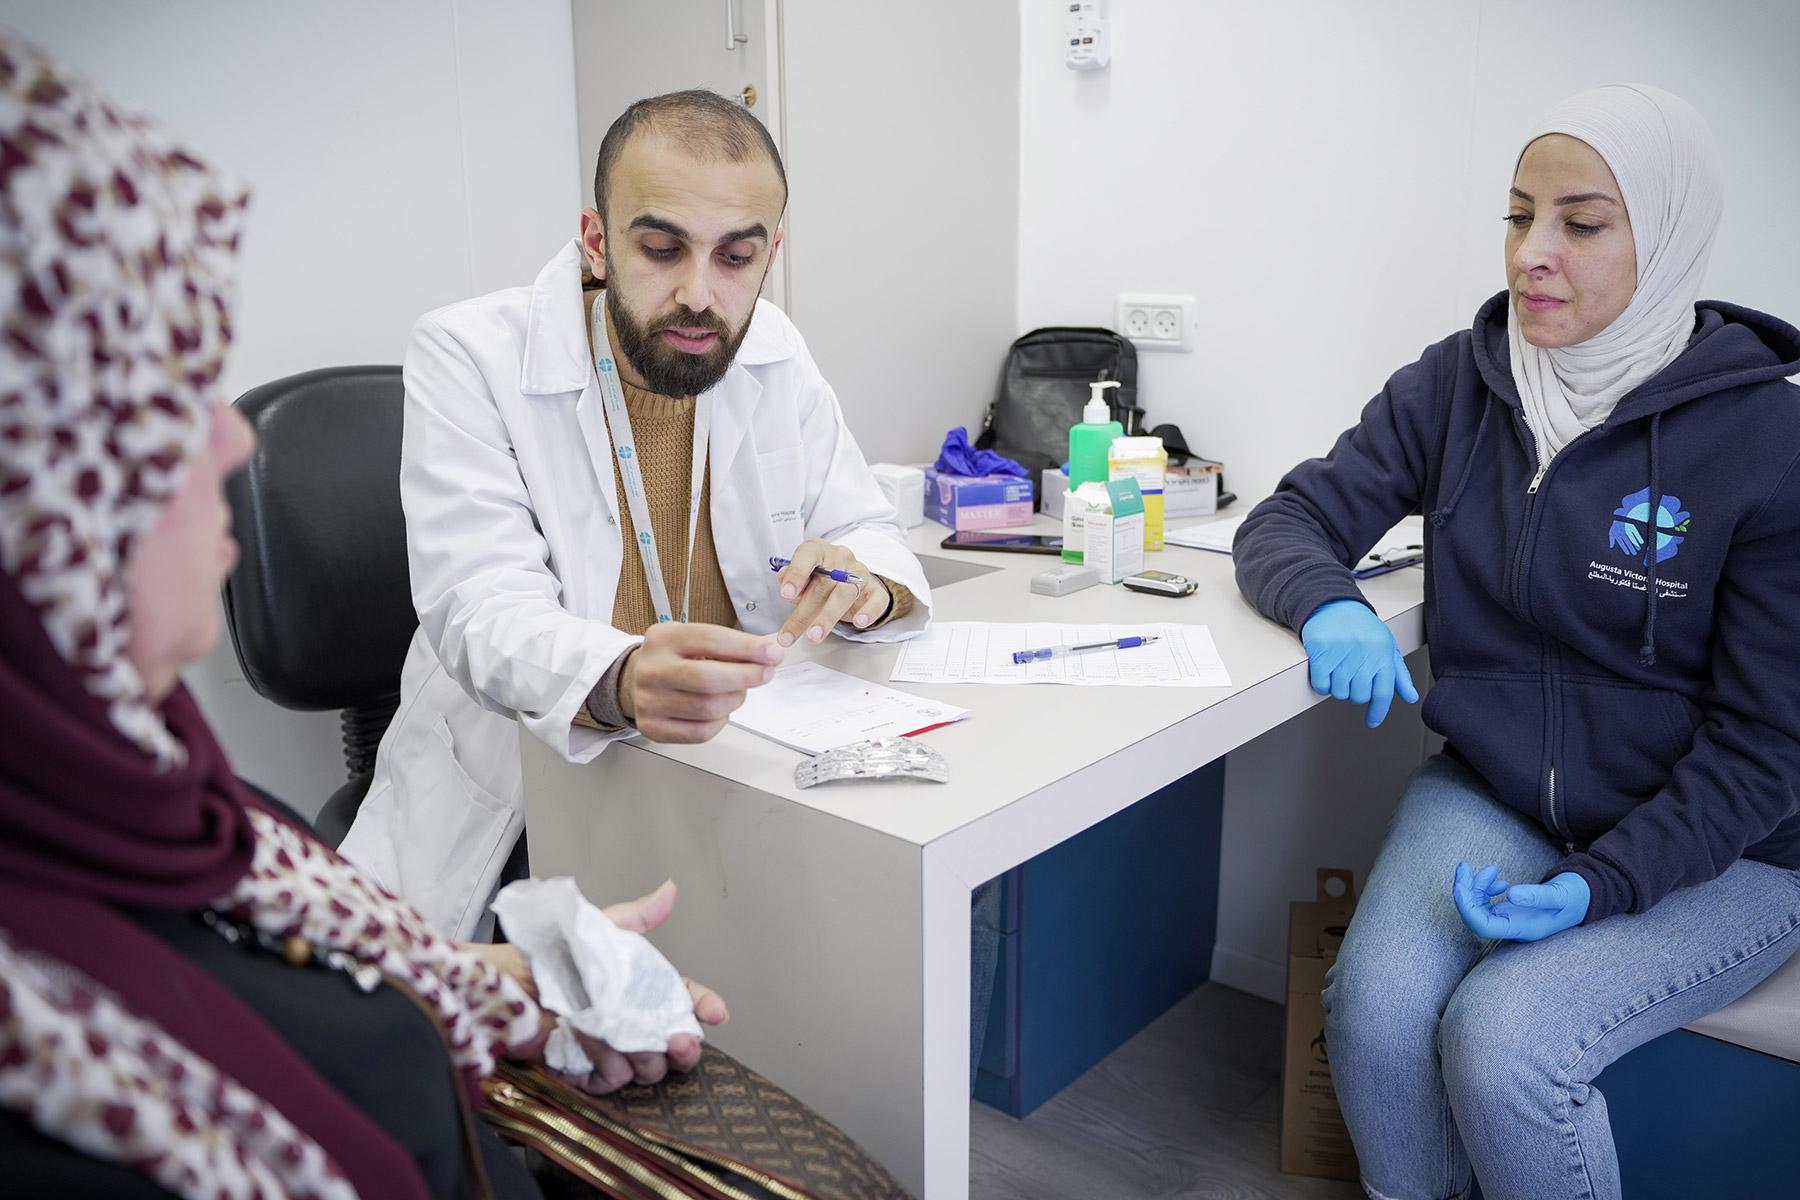 Dr Maen Hay Ahmed (center) and nurse Reena Abu Sneineh (right) during consultation in the mobile diabetes unit. Photo: LWF/ Abdalla Elayyan